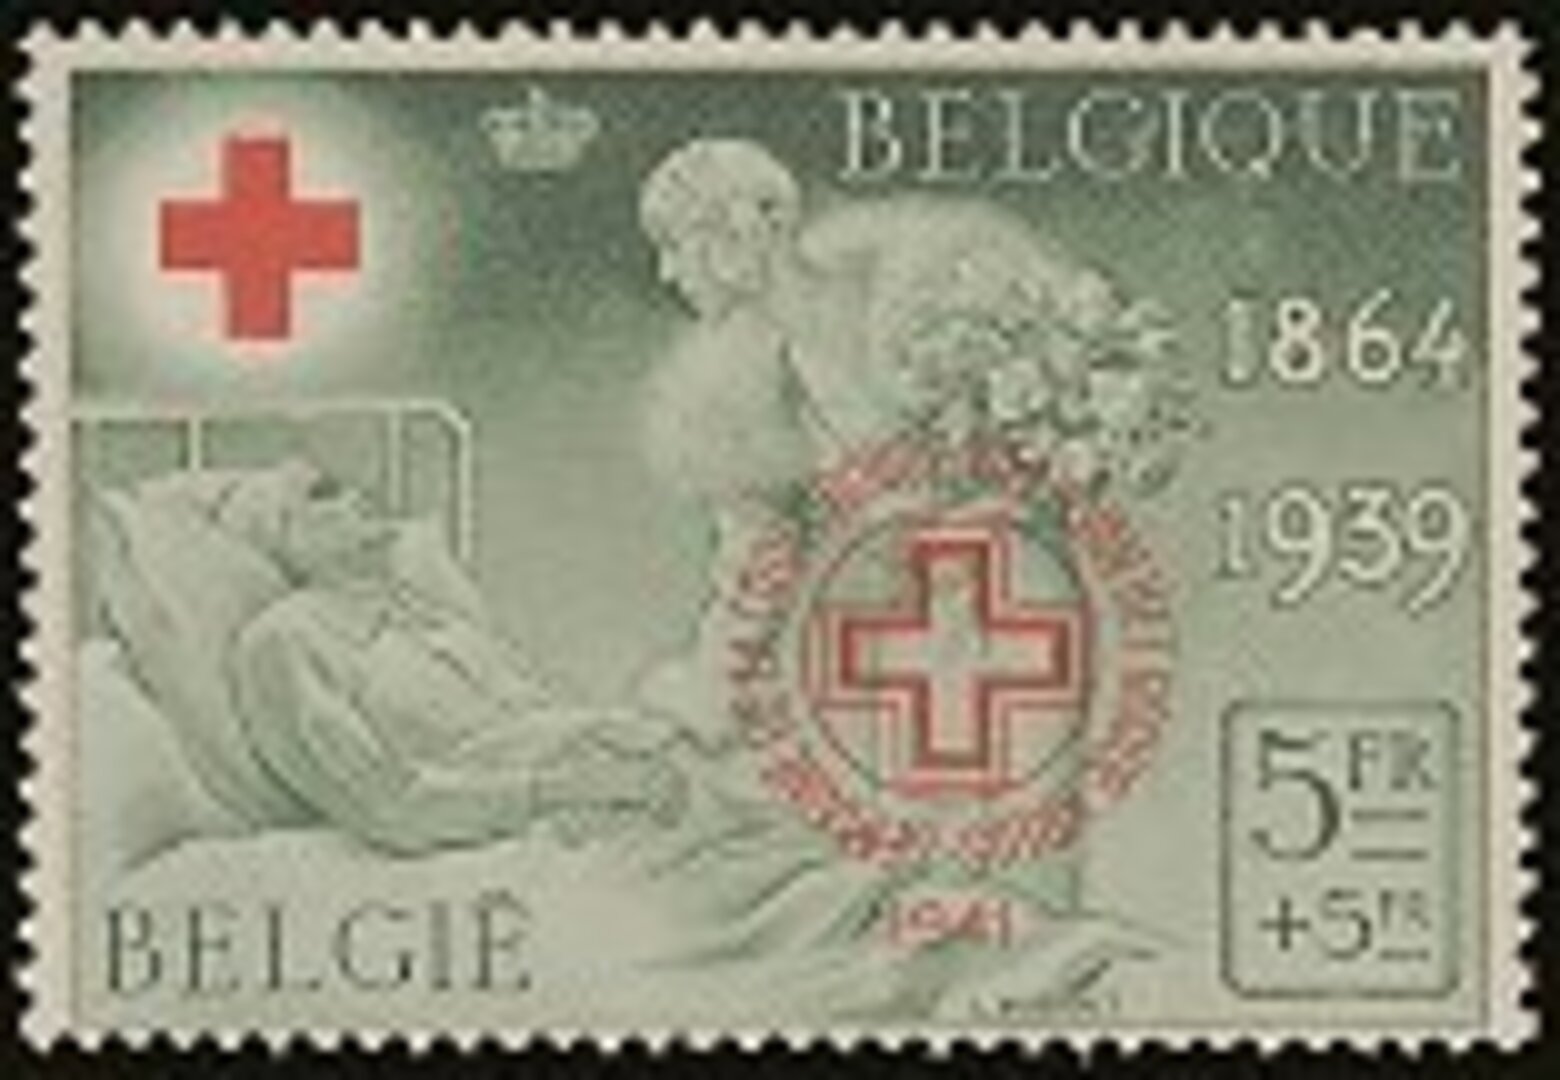 The Red Cross and Red Crescent Postage Stamp